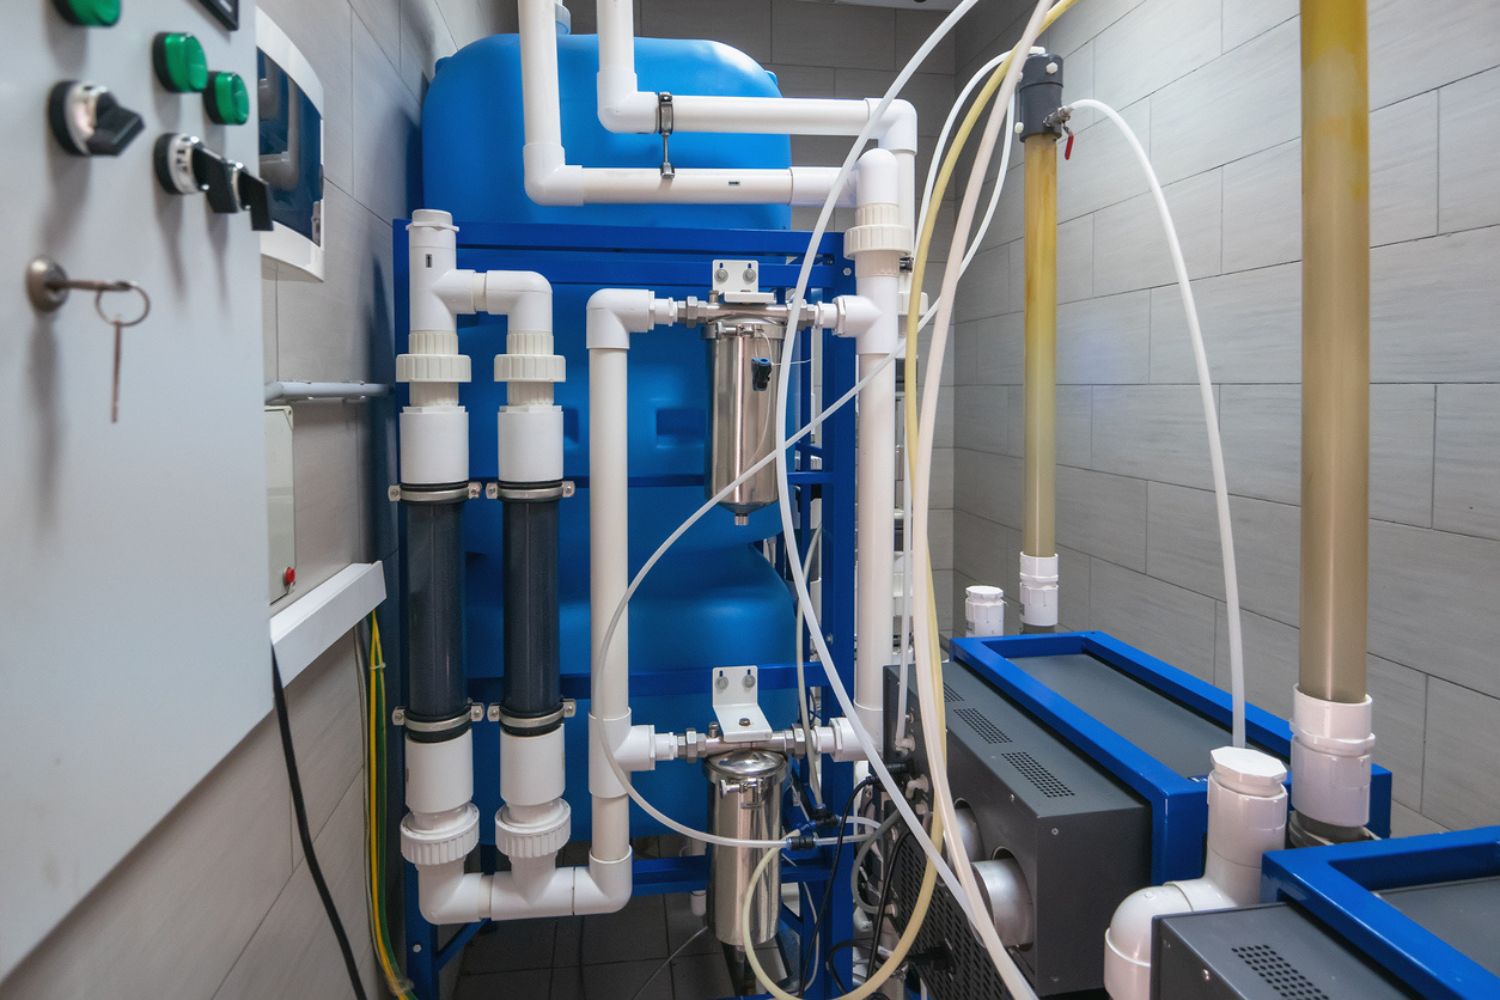 How Much Does a Whole-House Reverse Osmosis System Cost?